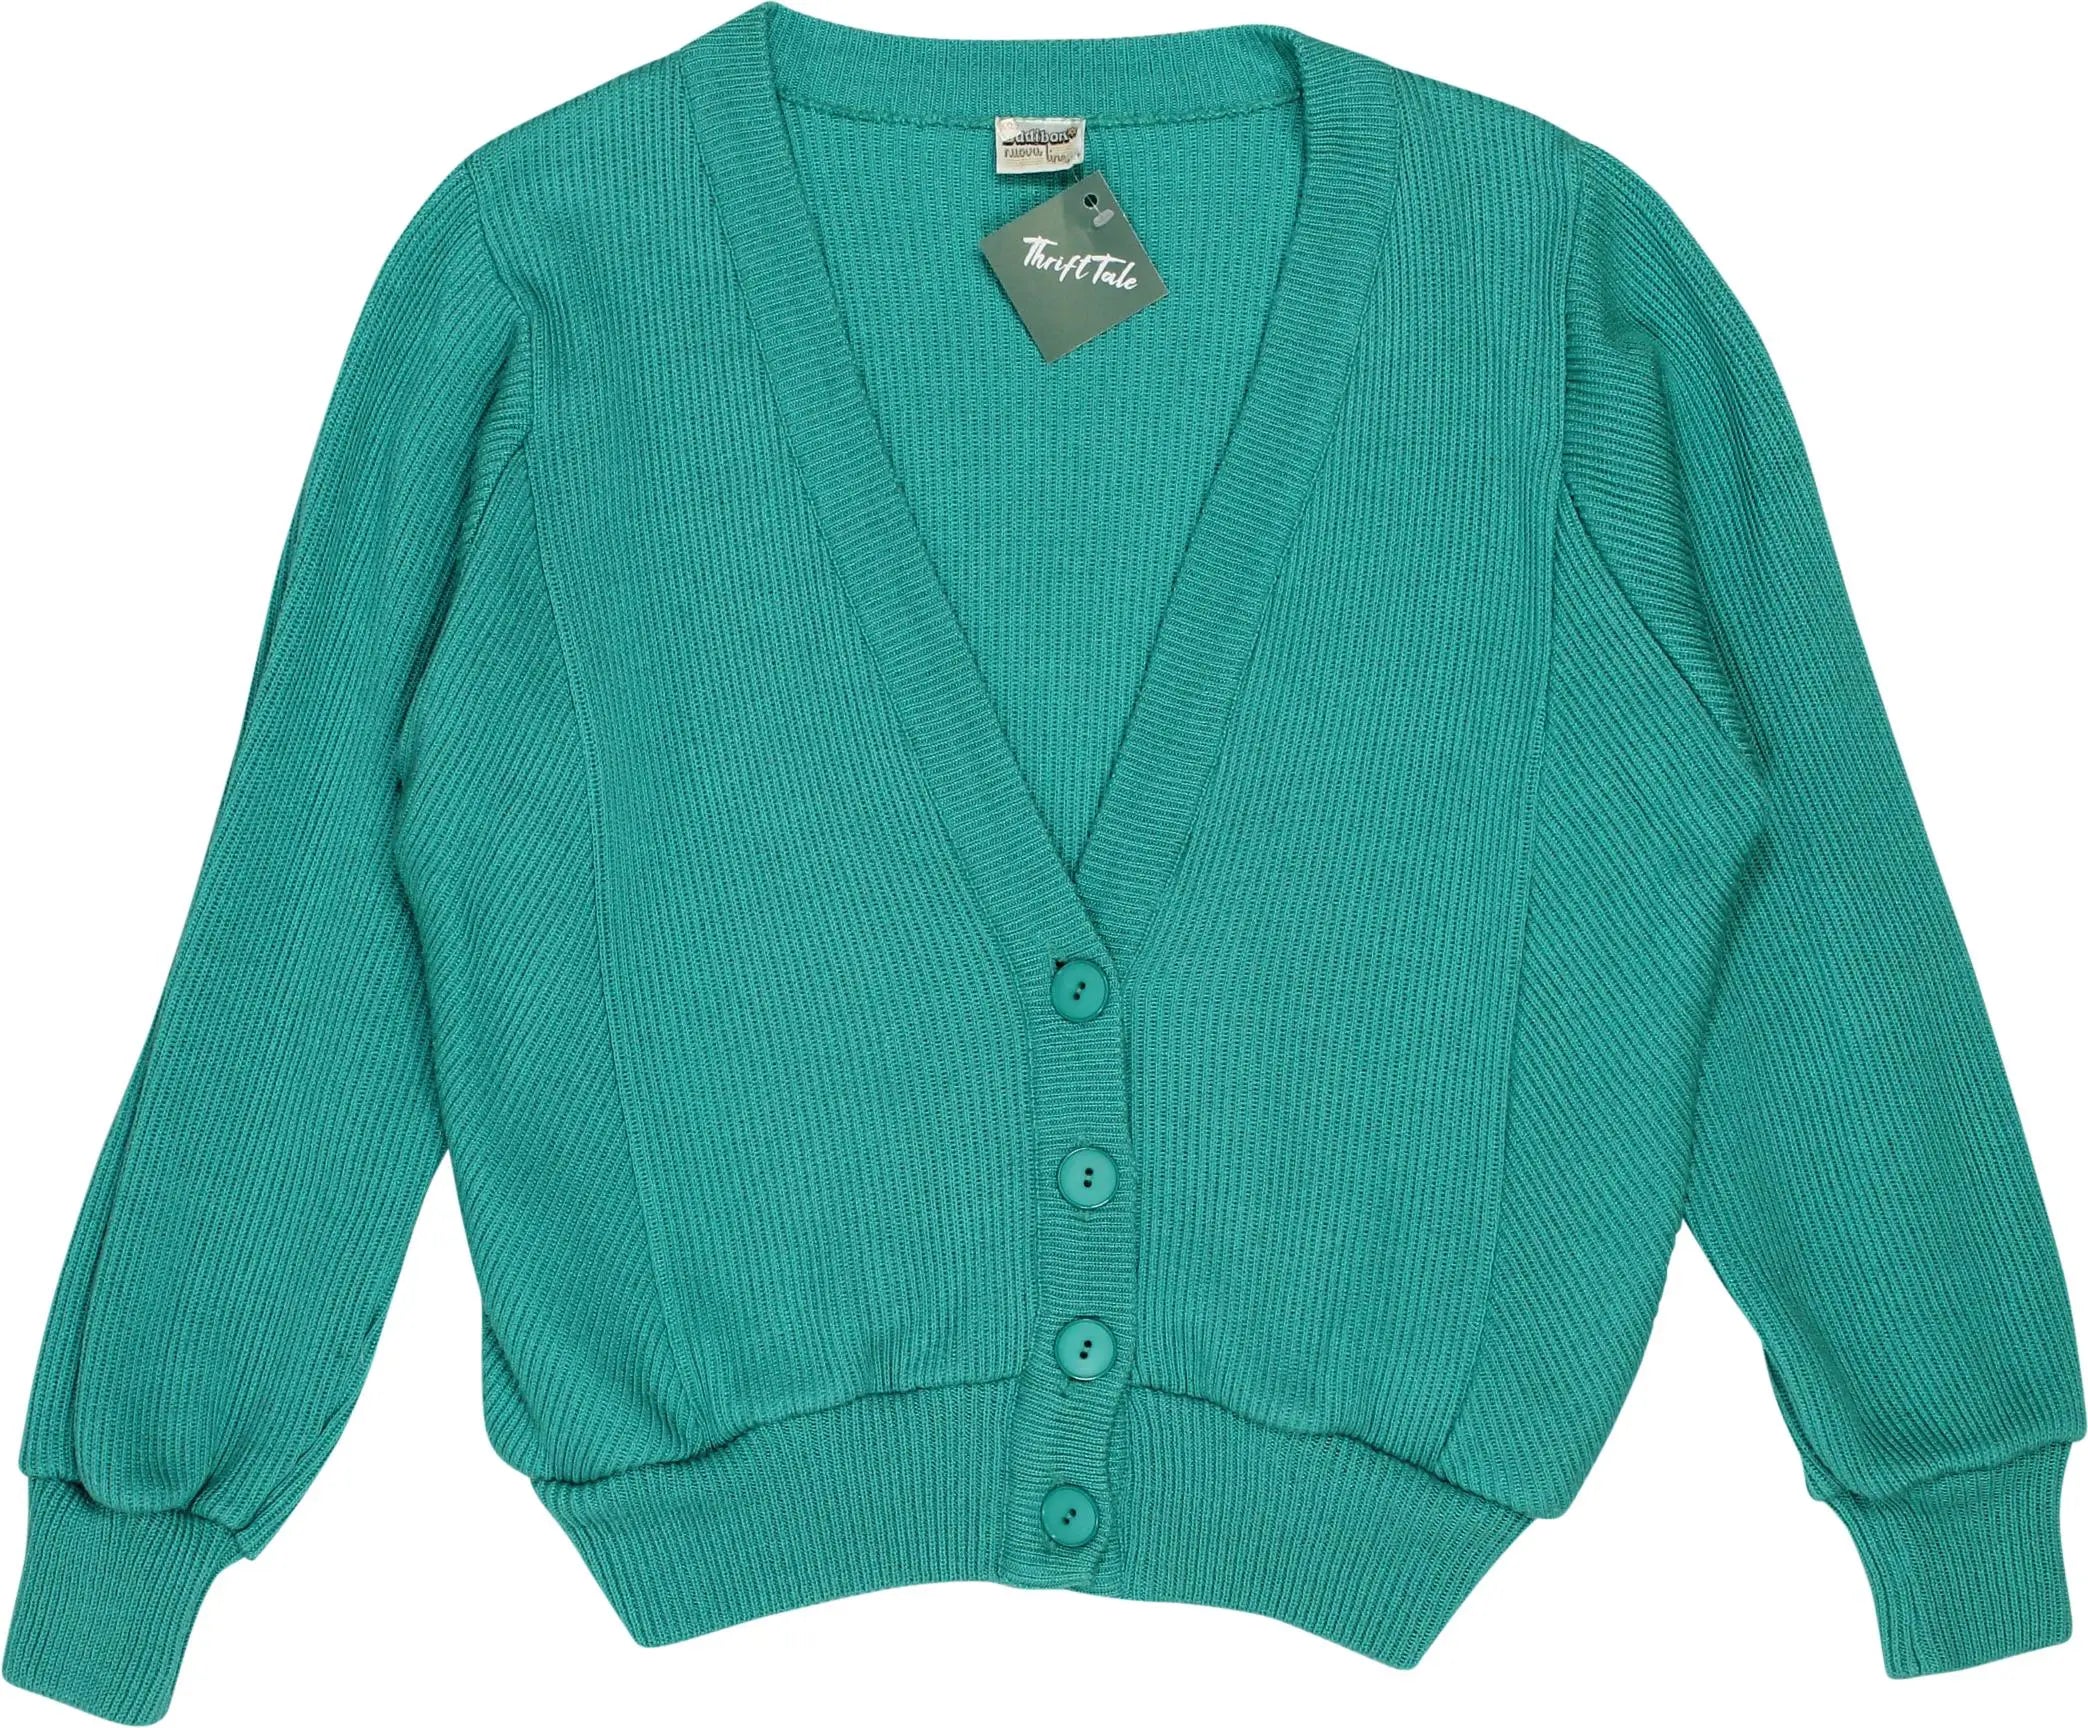 Unknown - Turquoise Knitted Cardigan- ThriftTale.com - Vintage and second handclothing